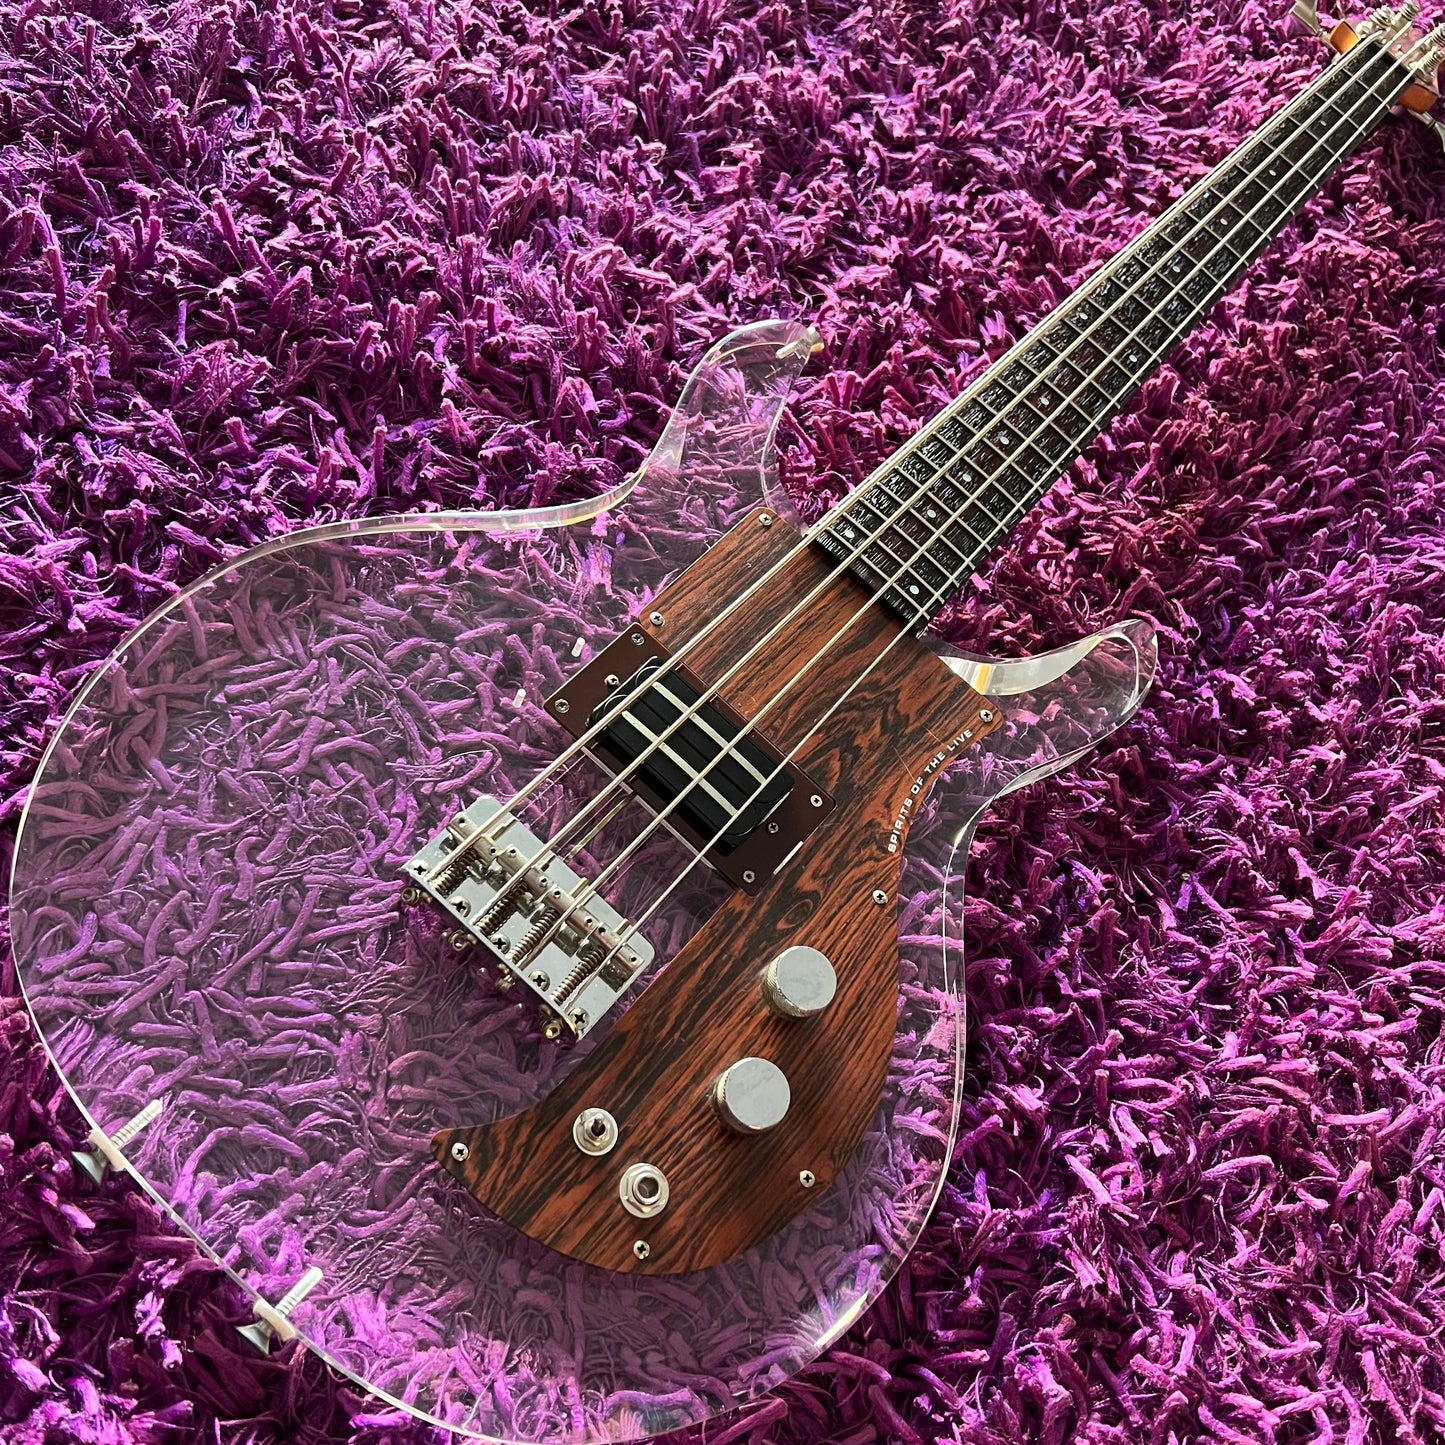 1990 Greco APB-1000 Lucite Bass Dan Armstrong Style (MIJ)